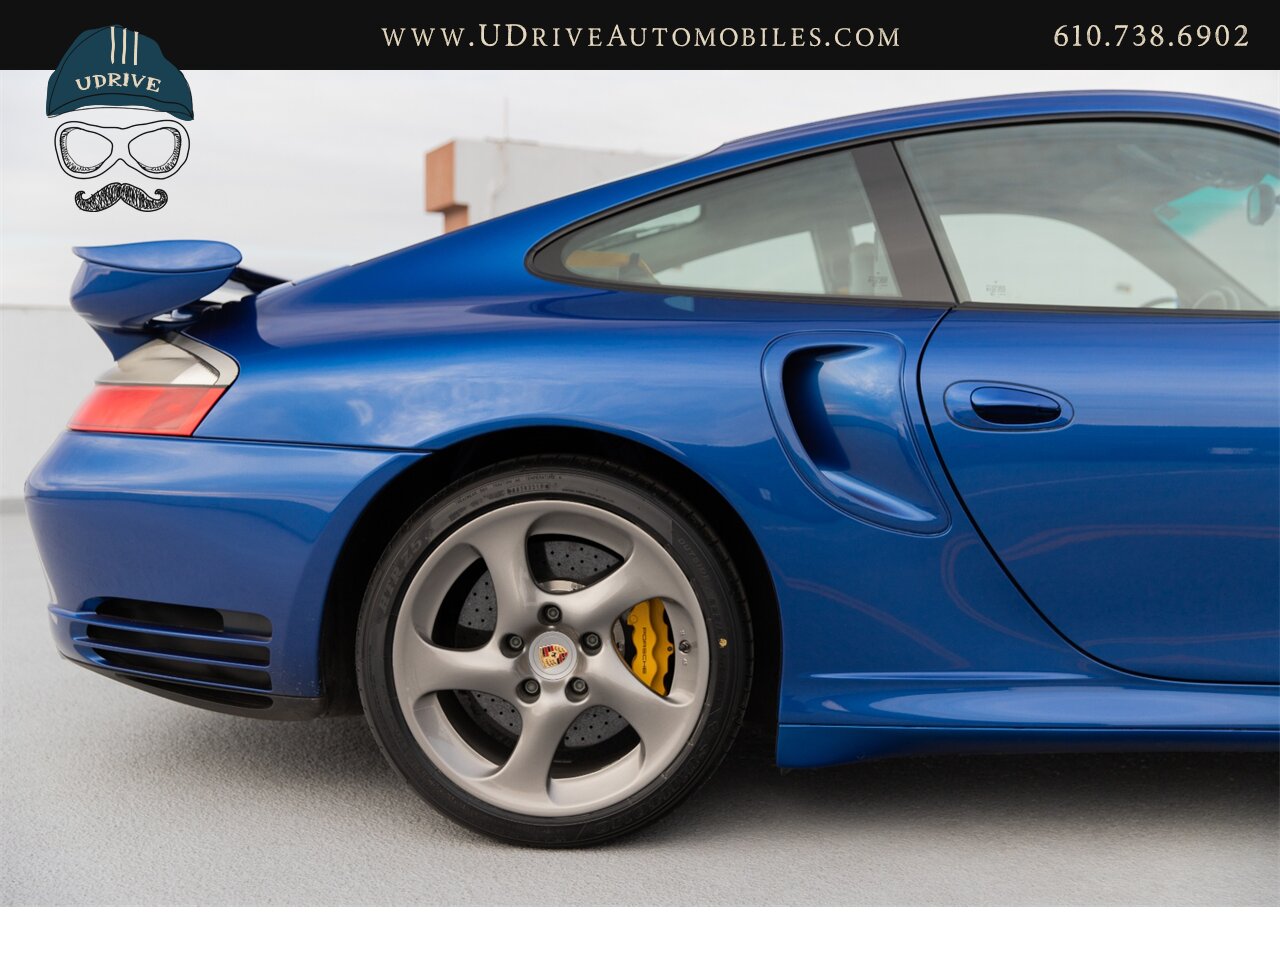 2005 Porsche 911 Turbo S Factory Aerokit Extremely Rare Cobalt Blue  Yellow Deviating Stitching 1 of a Kind Spec $160k MSRP - Photo 19 - West Chester, PA 19382